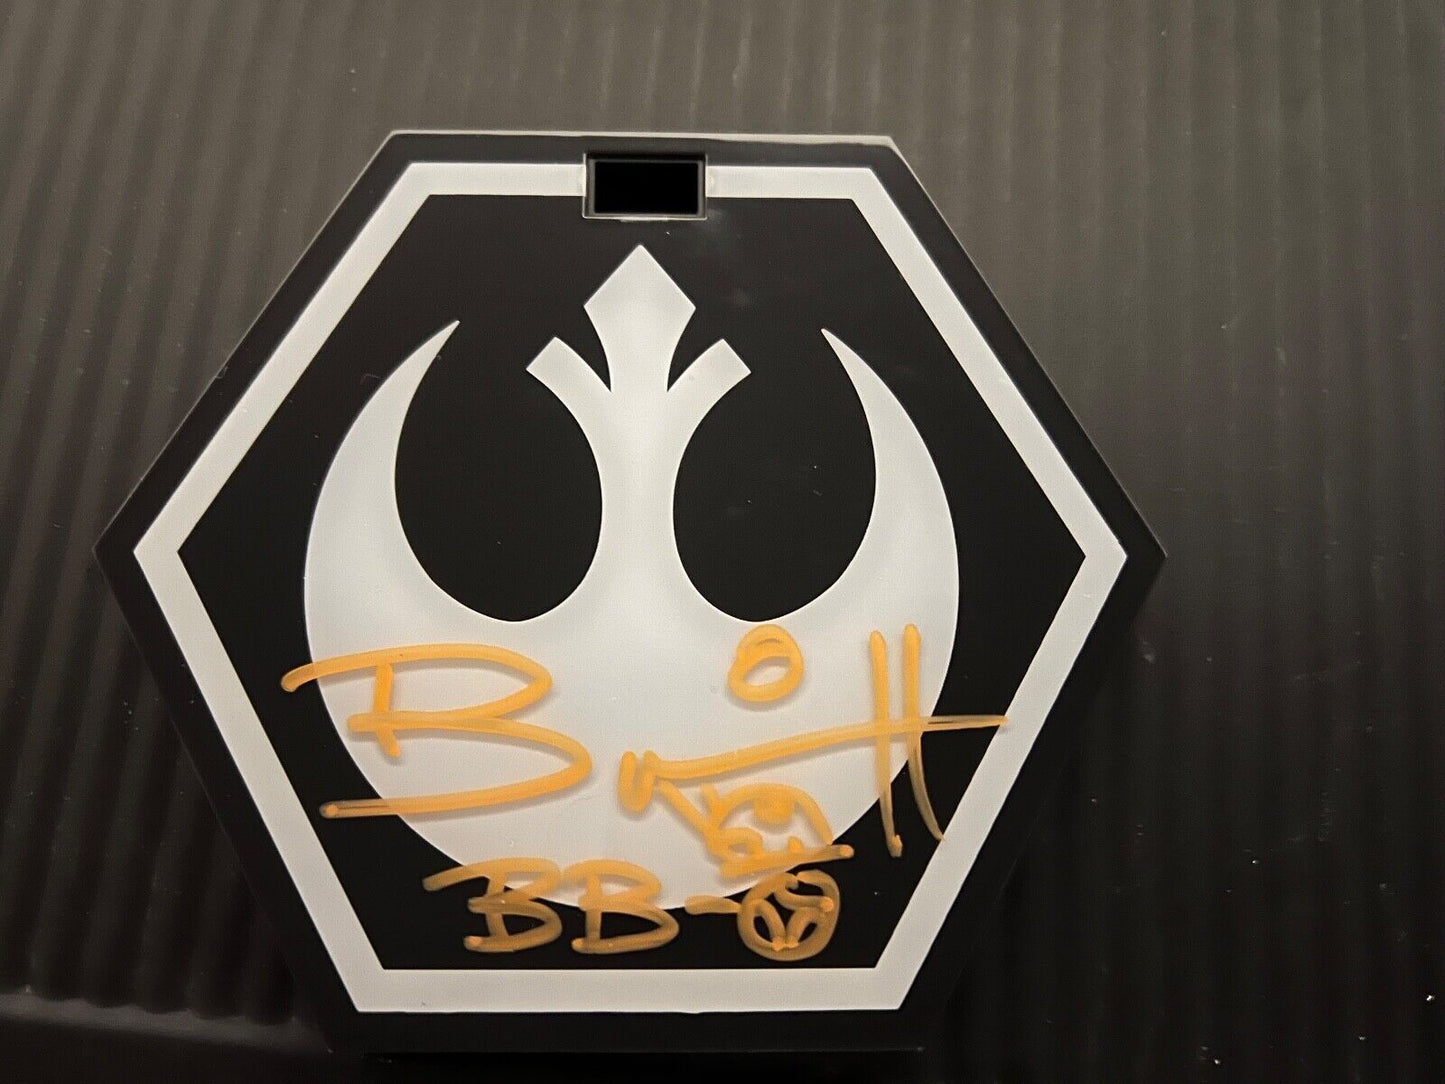 REY AND BB-8 Sixth Scale Figure by Hot Toys SIGNED by Brian Herring at ECCC